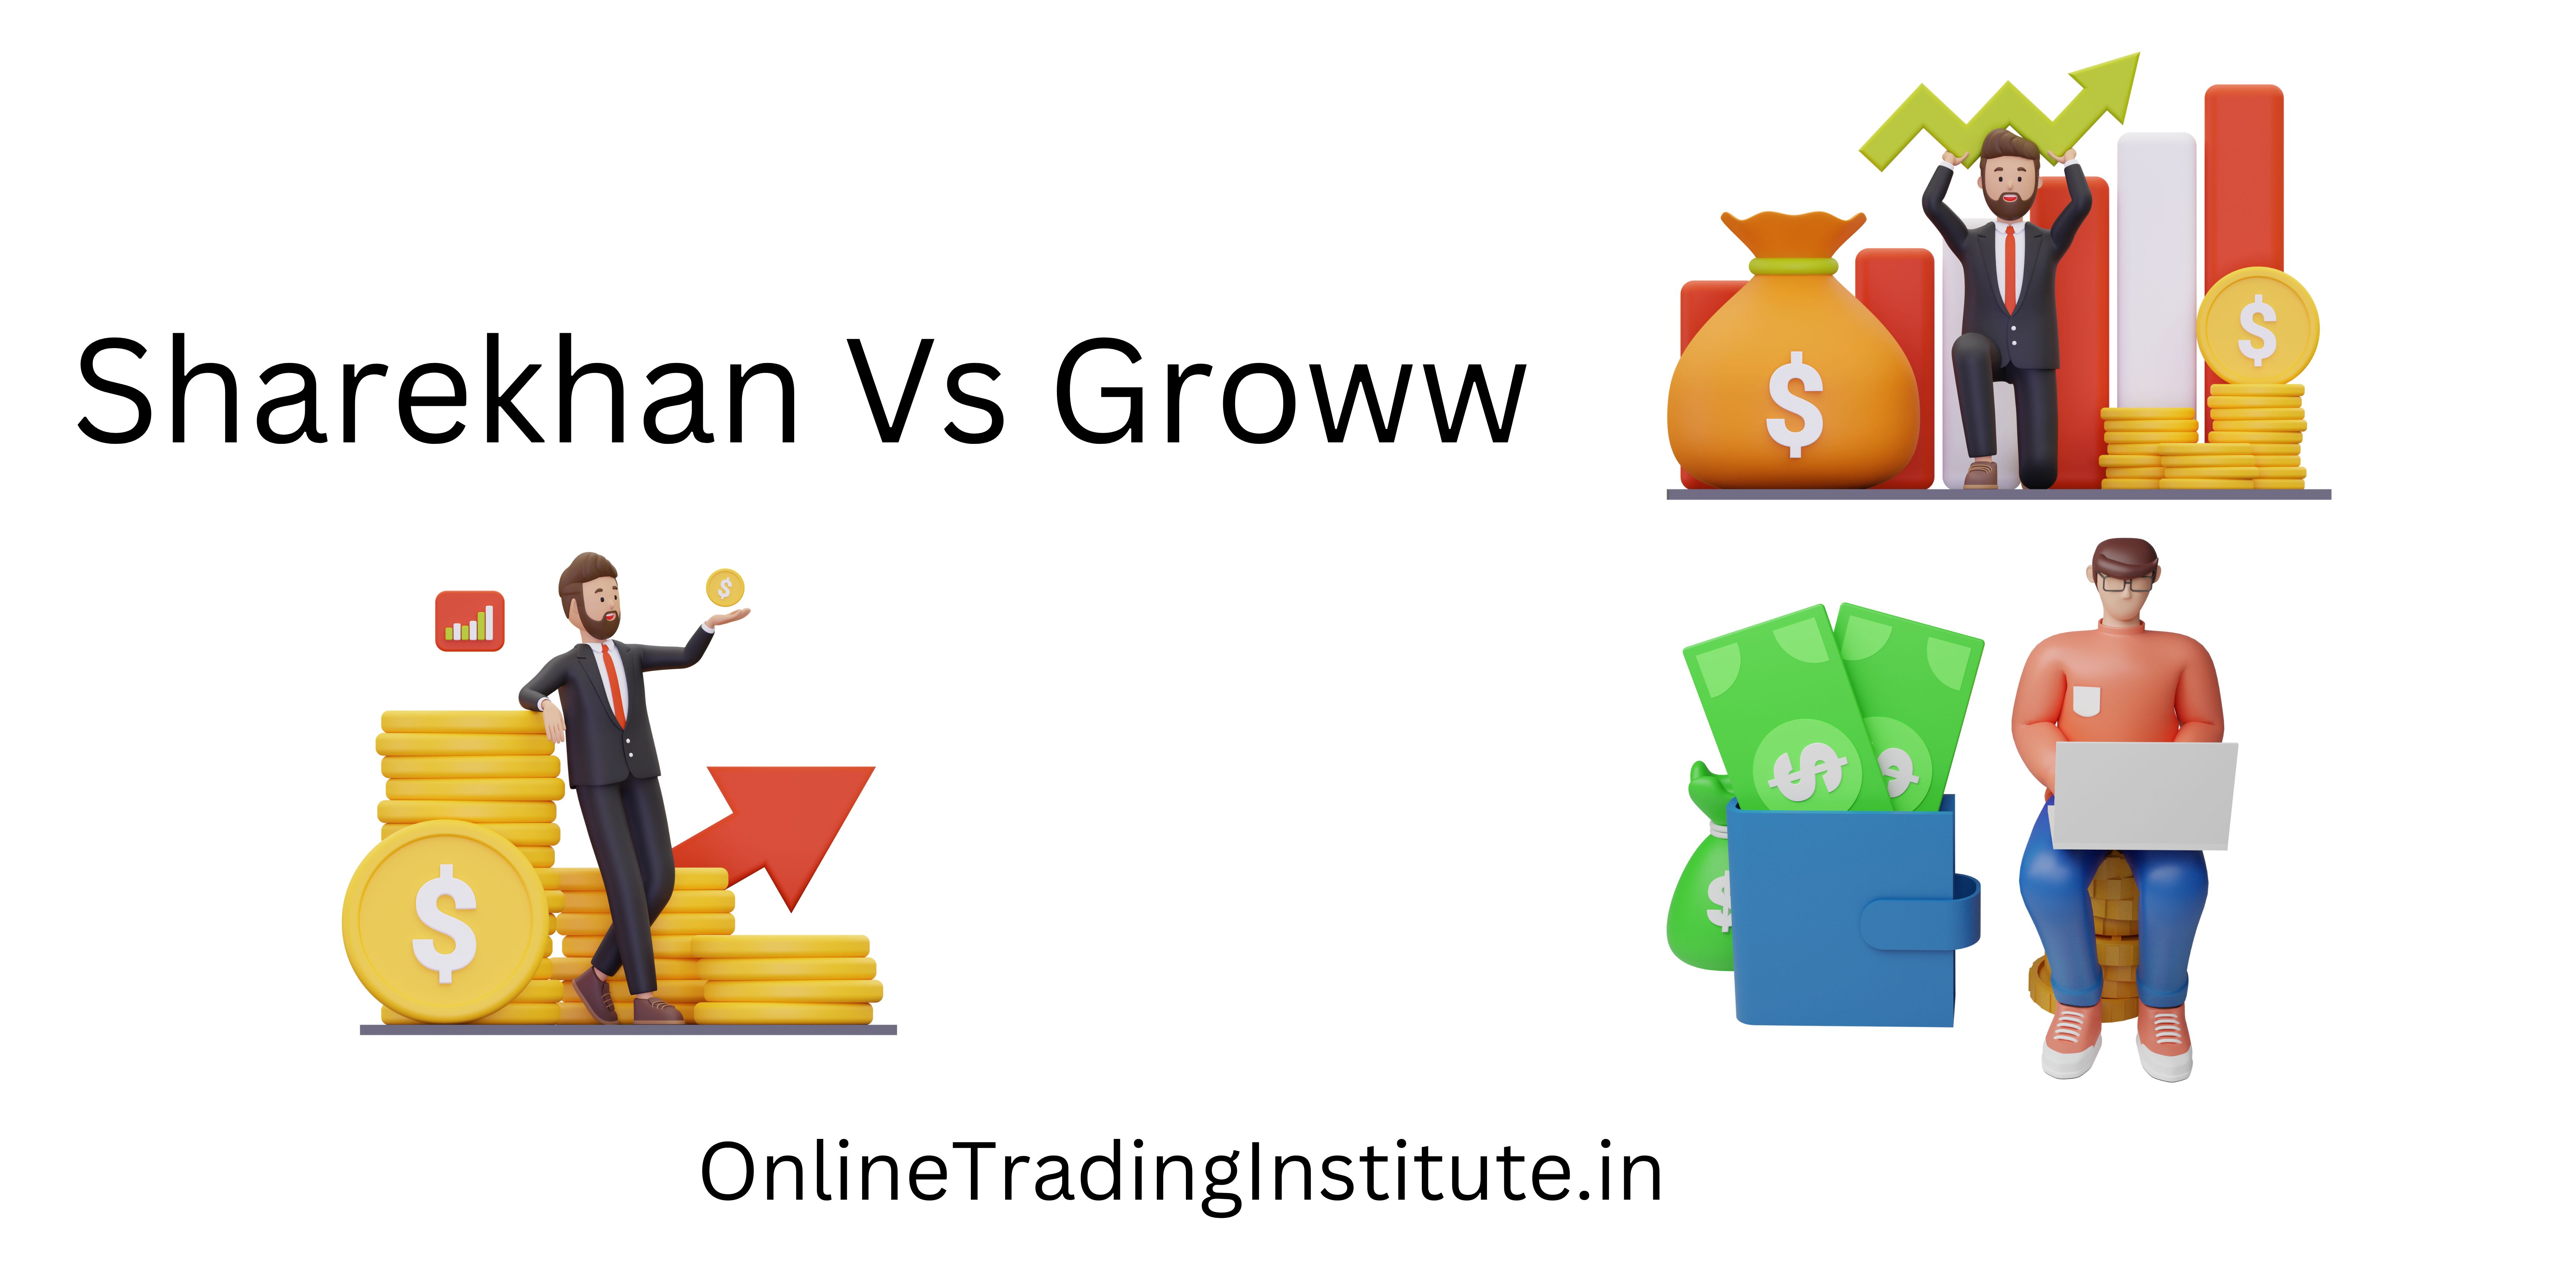 Groww vs Sharekhan: A 360 Degree View of Which Broker to Choose